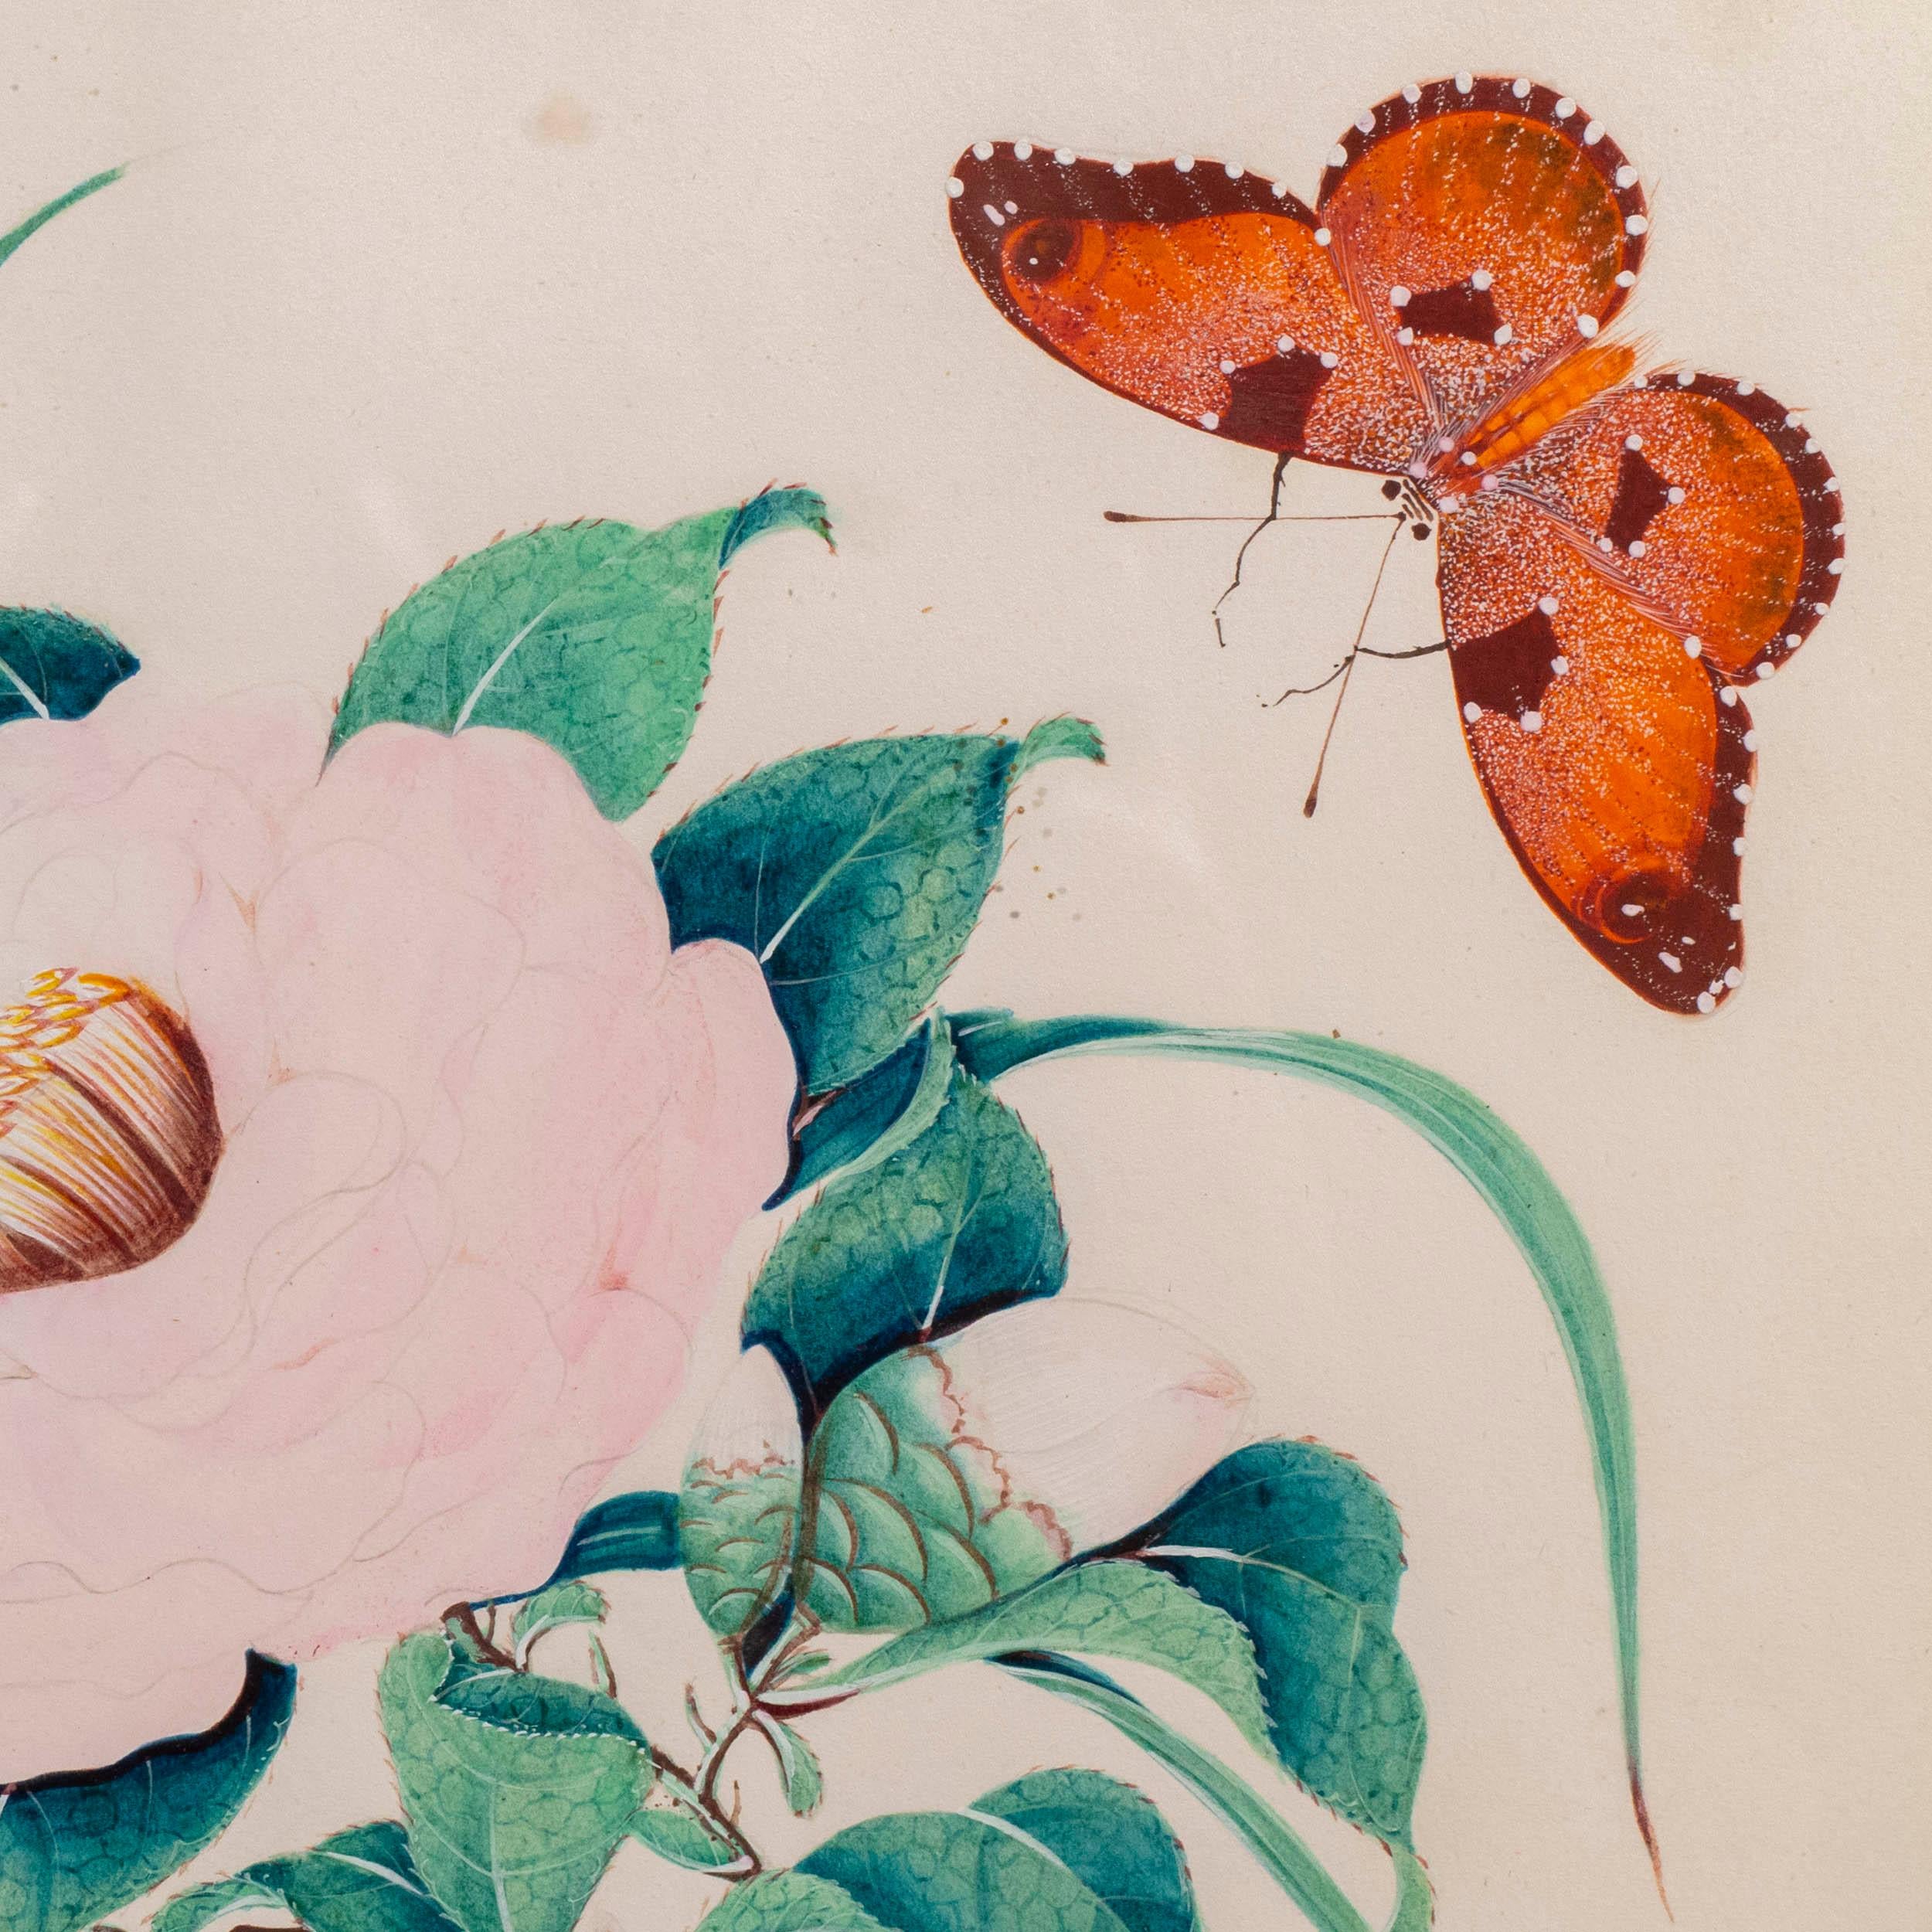 A pair of exquisite gouache / watercolour studies of exotic flowers and butterflies;
European in the Cantonese style, circa 1900.

Why we like them
Exquisitely hand-painted with lots of minute details, vibrant and luscious, these beautiful